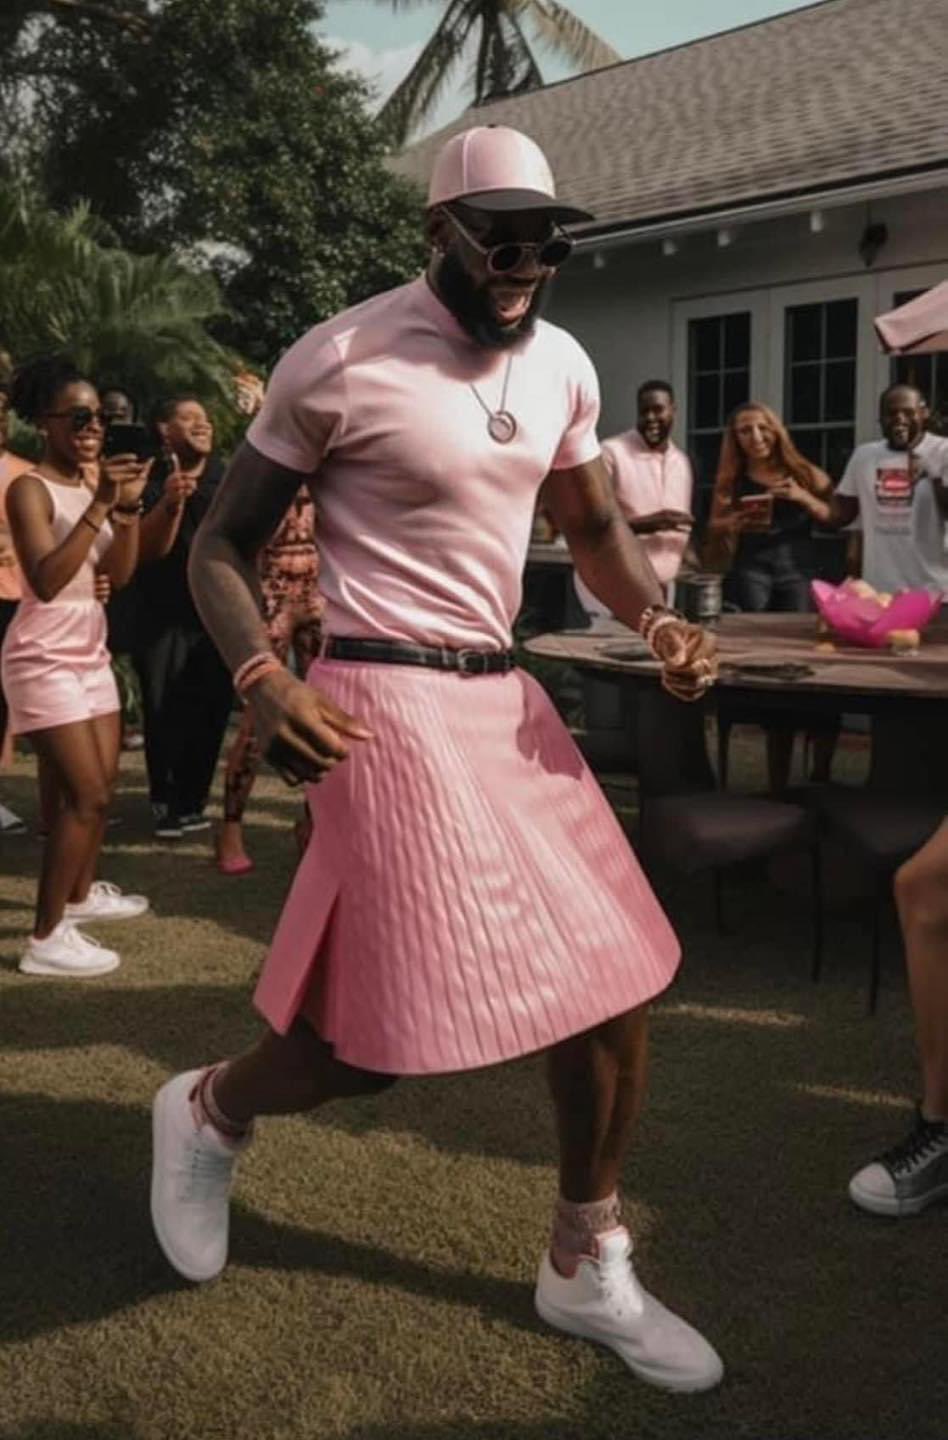 likhoa the latest photos of lebron james wearing a striking pink dress while attending the barbie movie premiere are trending 651a6ce92b9f2 The Latest Photos Of Lebron James Wearing A Striking Pink Dress While Attending The Barbie Movie Premiere Are Trending